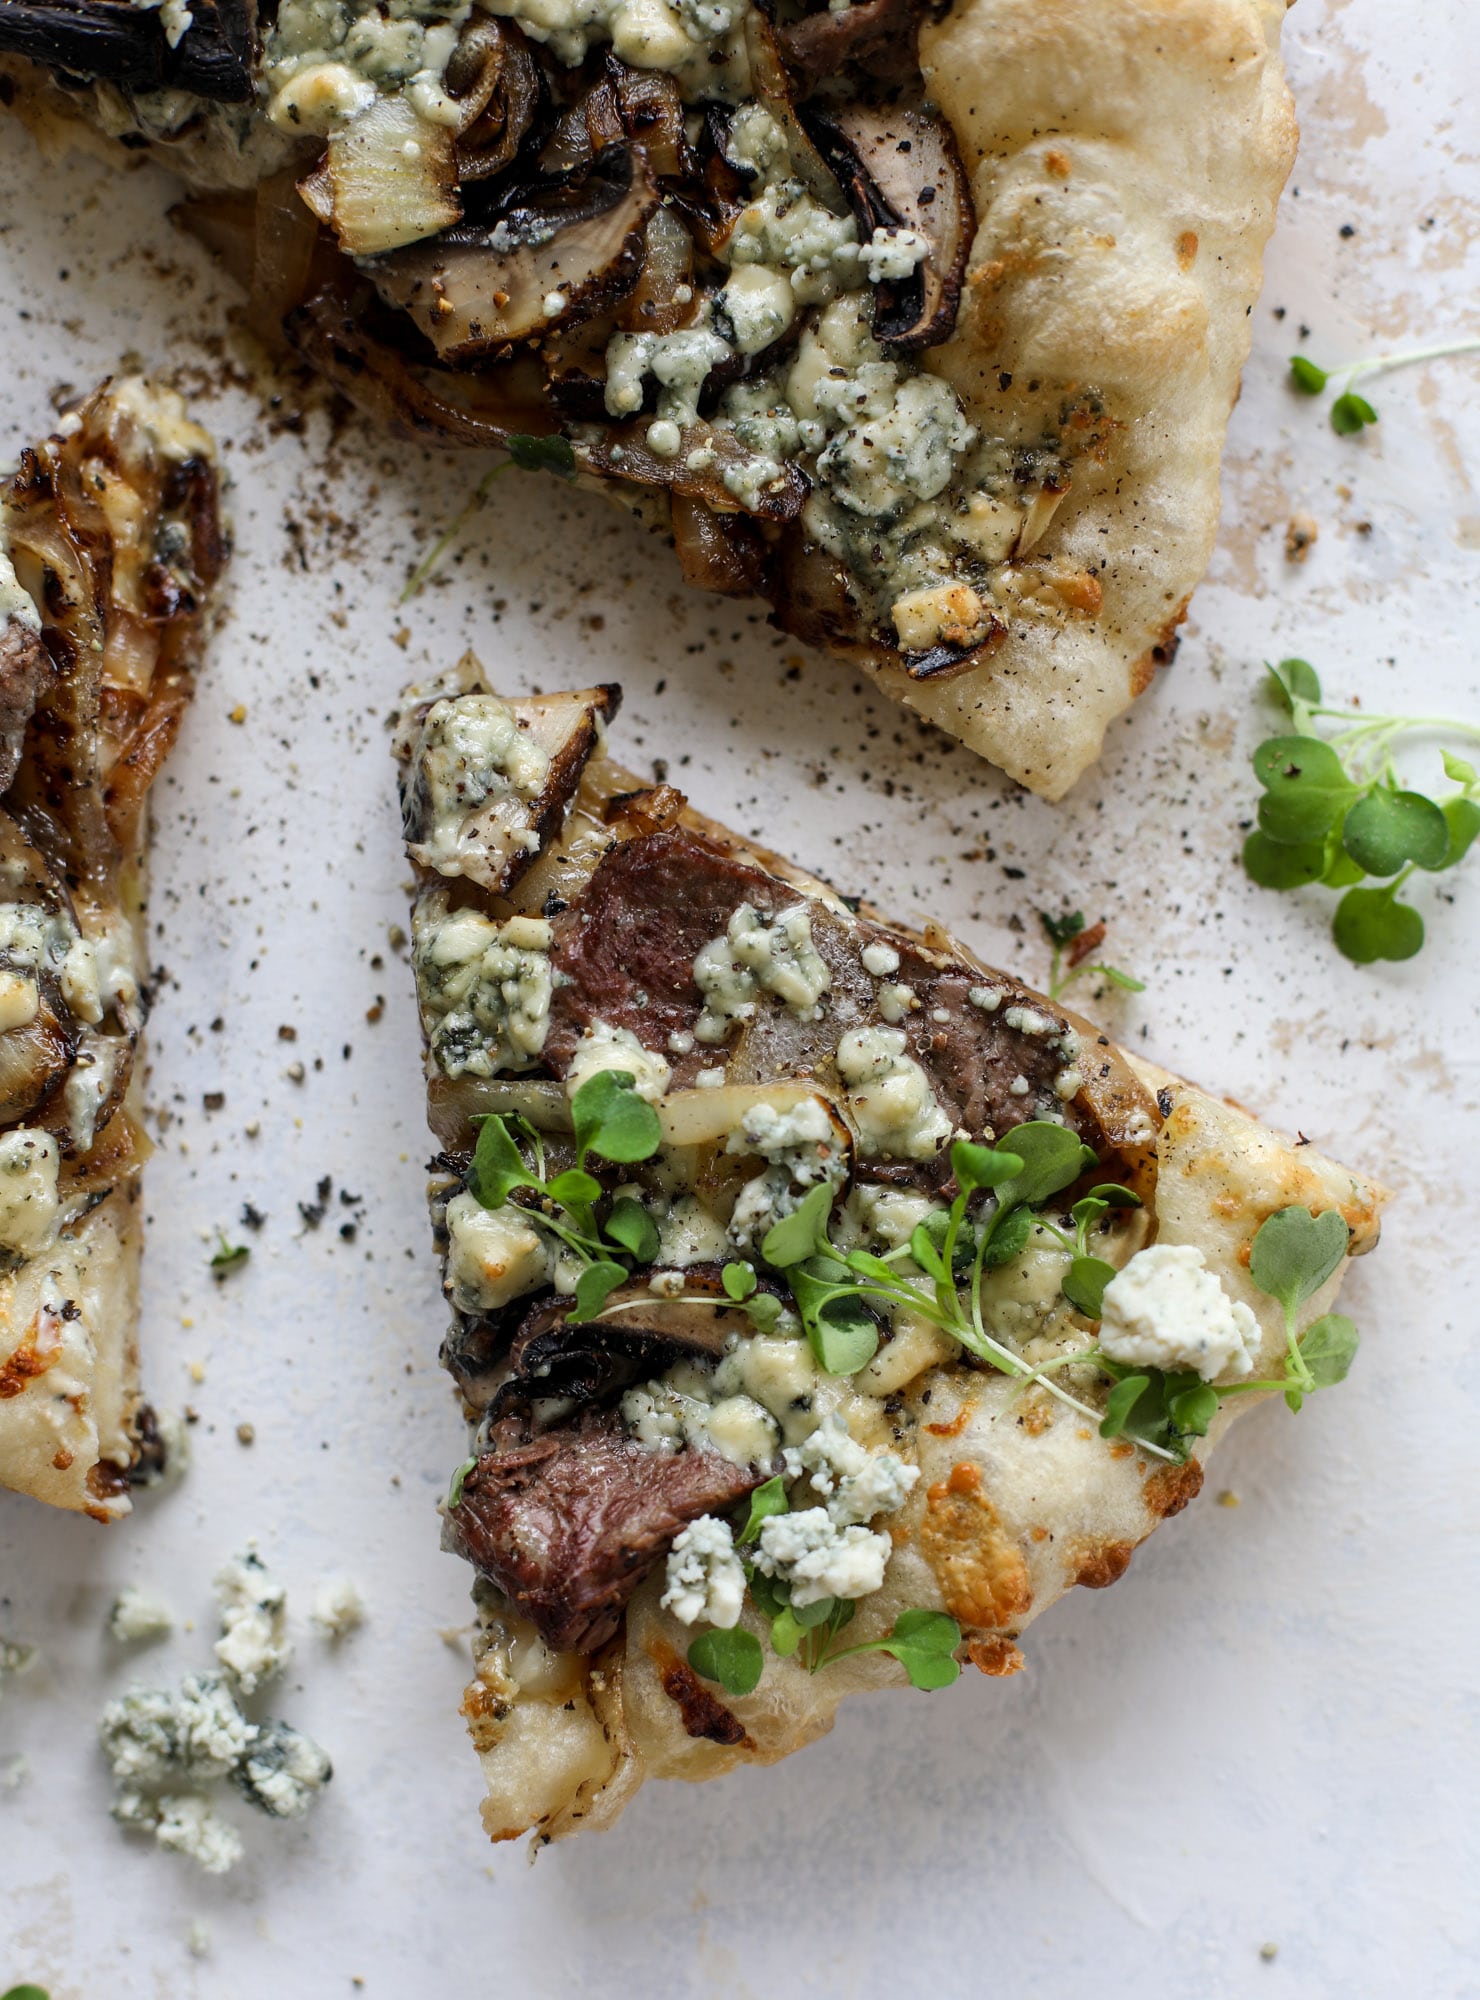 This grilled steakhouse pizza has all the amazing smoky flavors of your favorite steakhouse. Grilled onions, mushrooms and creamy gorgonzola finish it off.